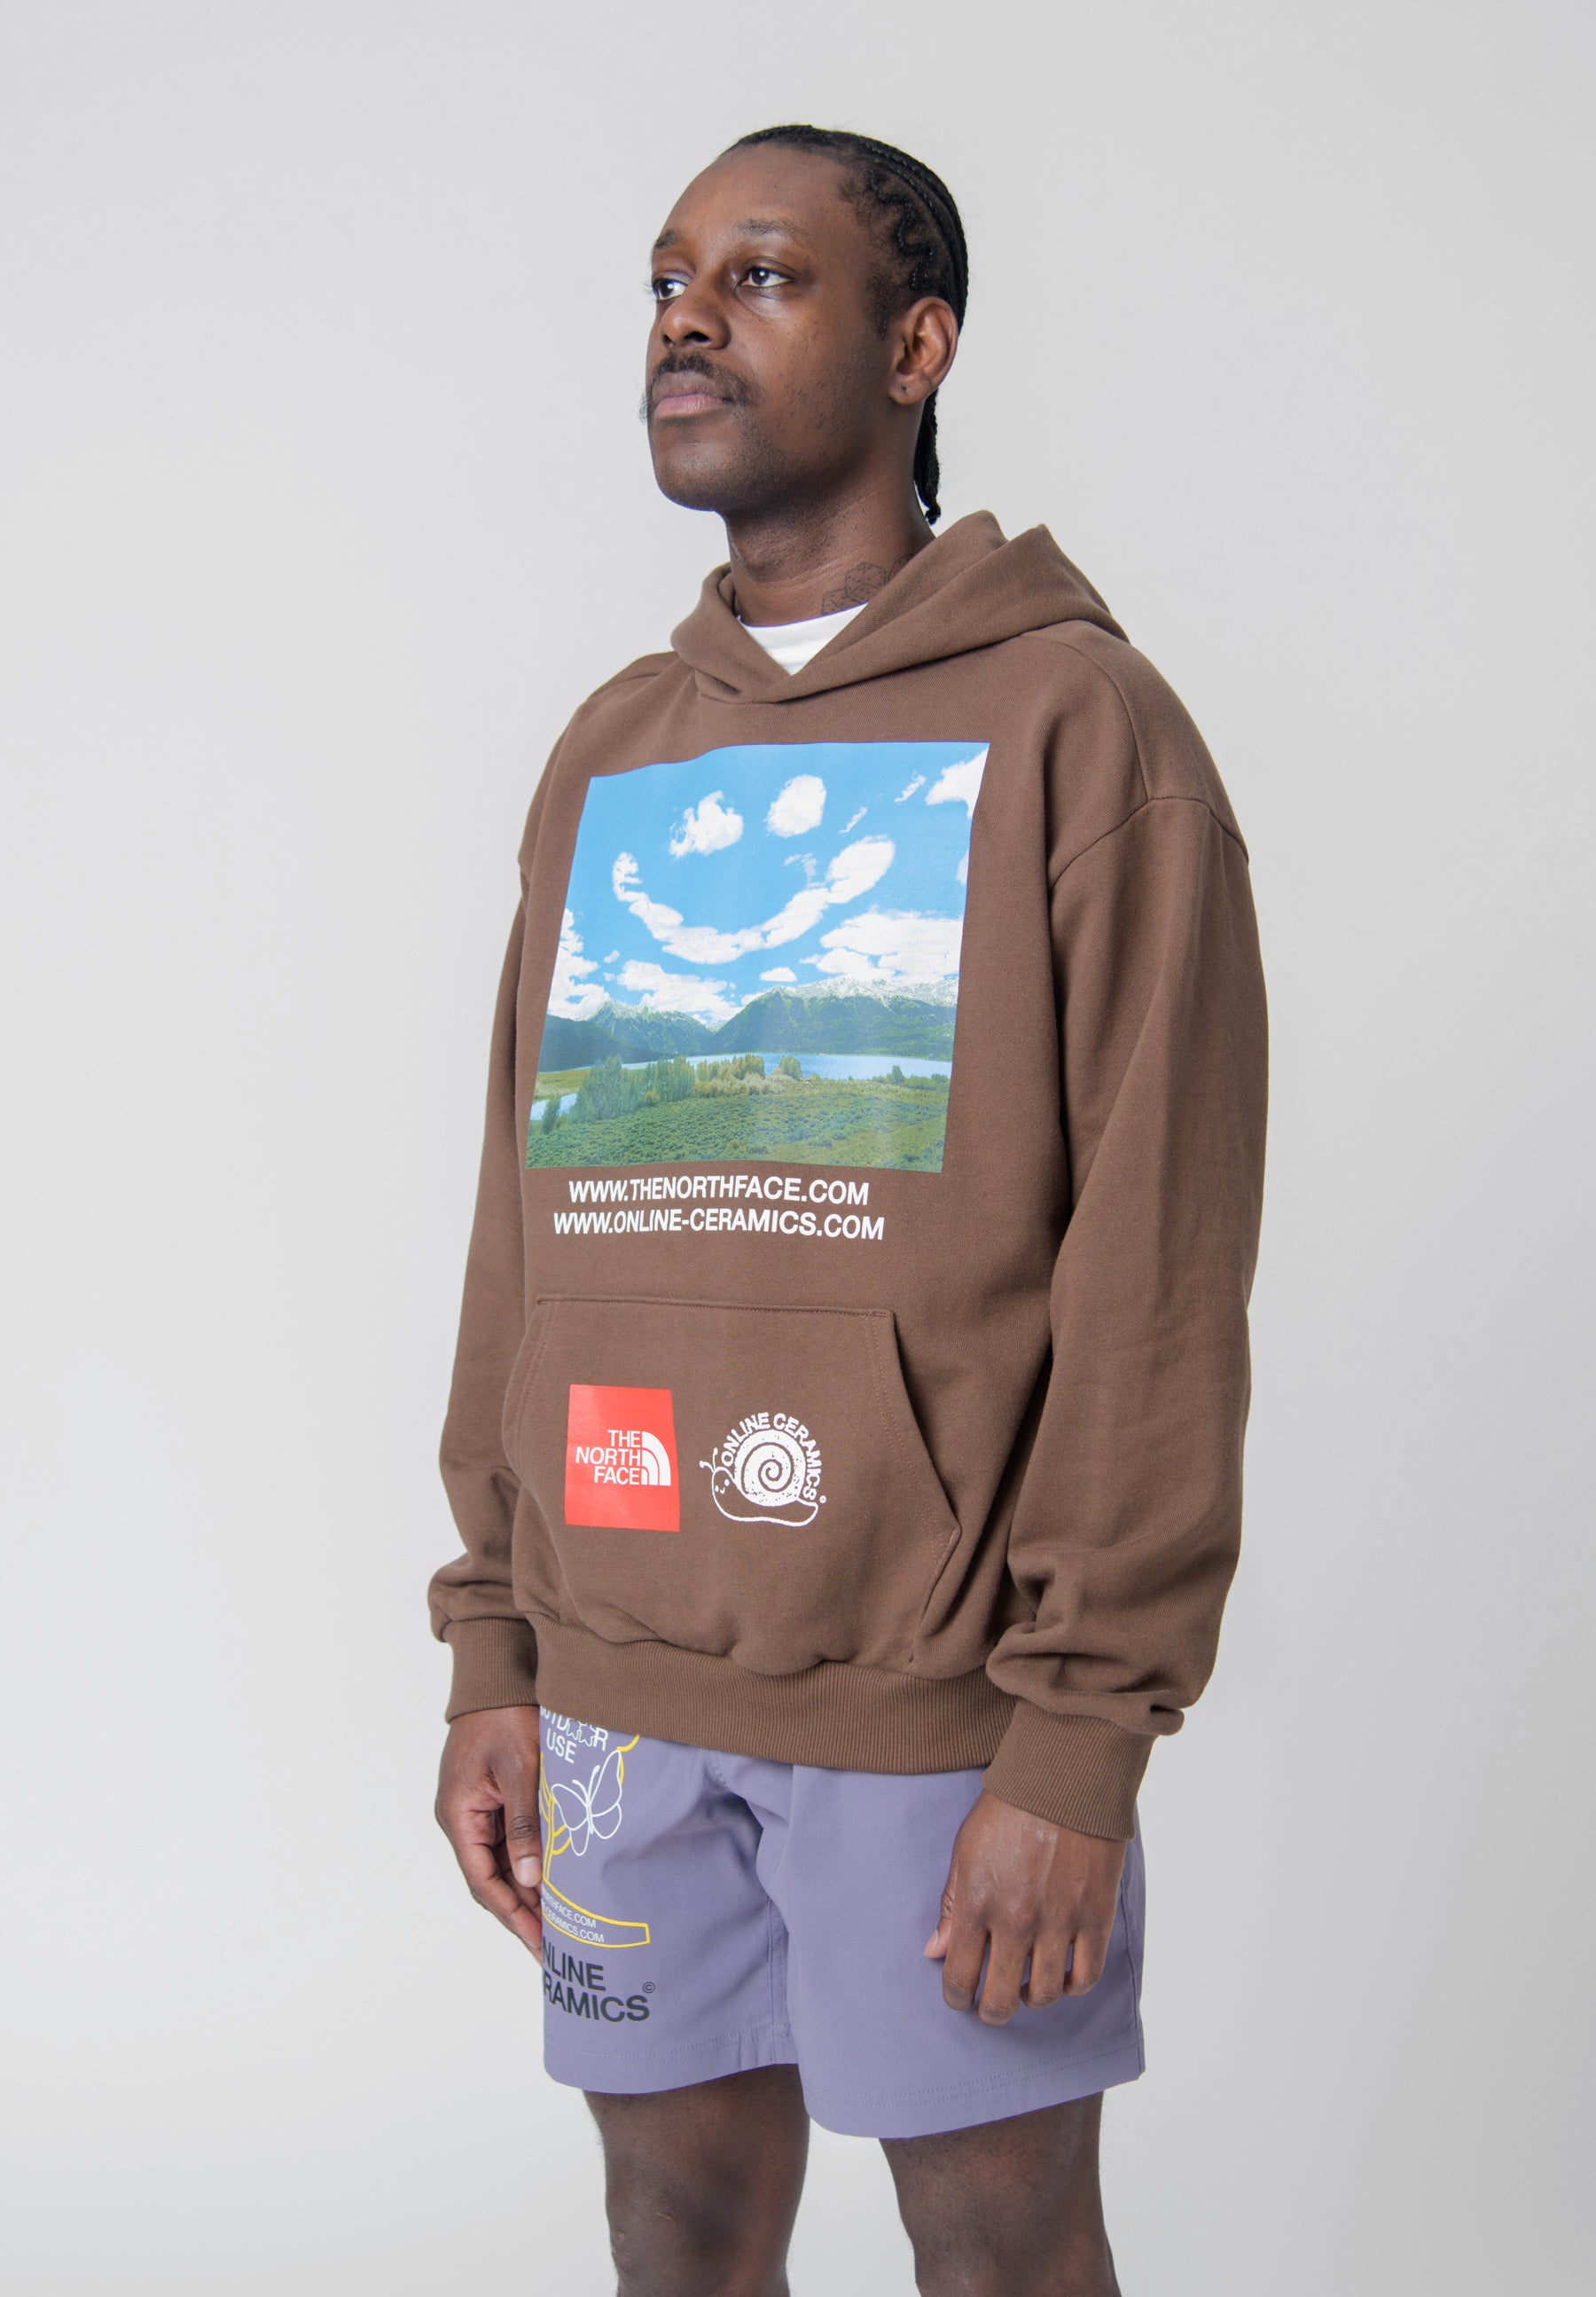 Online Ceramics Hoodie Earth Brown 84RV0KA (LAUNCH PRODUCT) – NOMAD